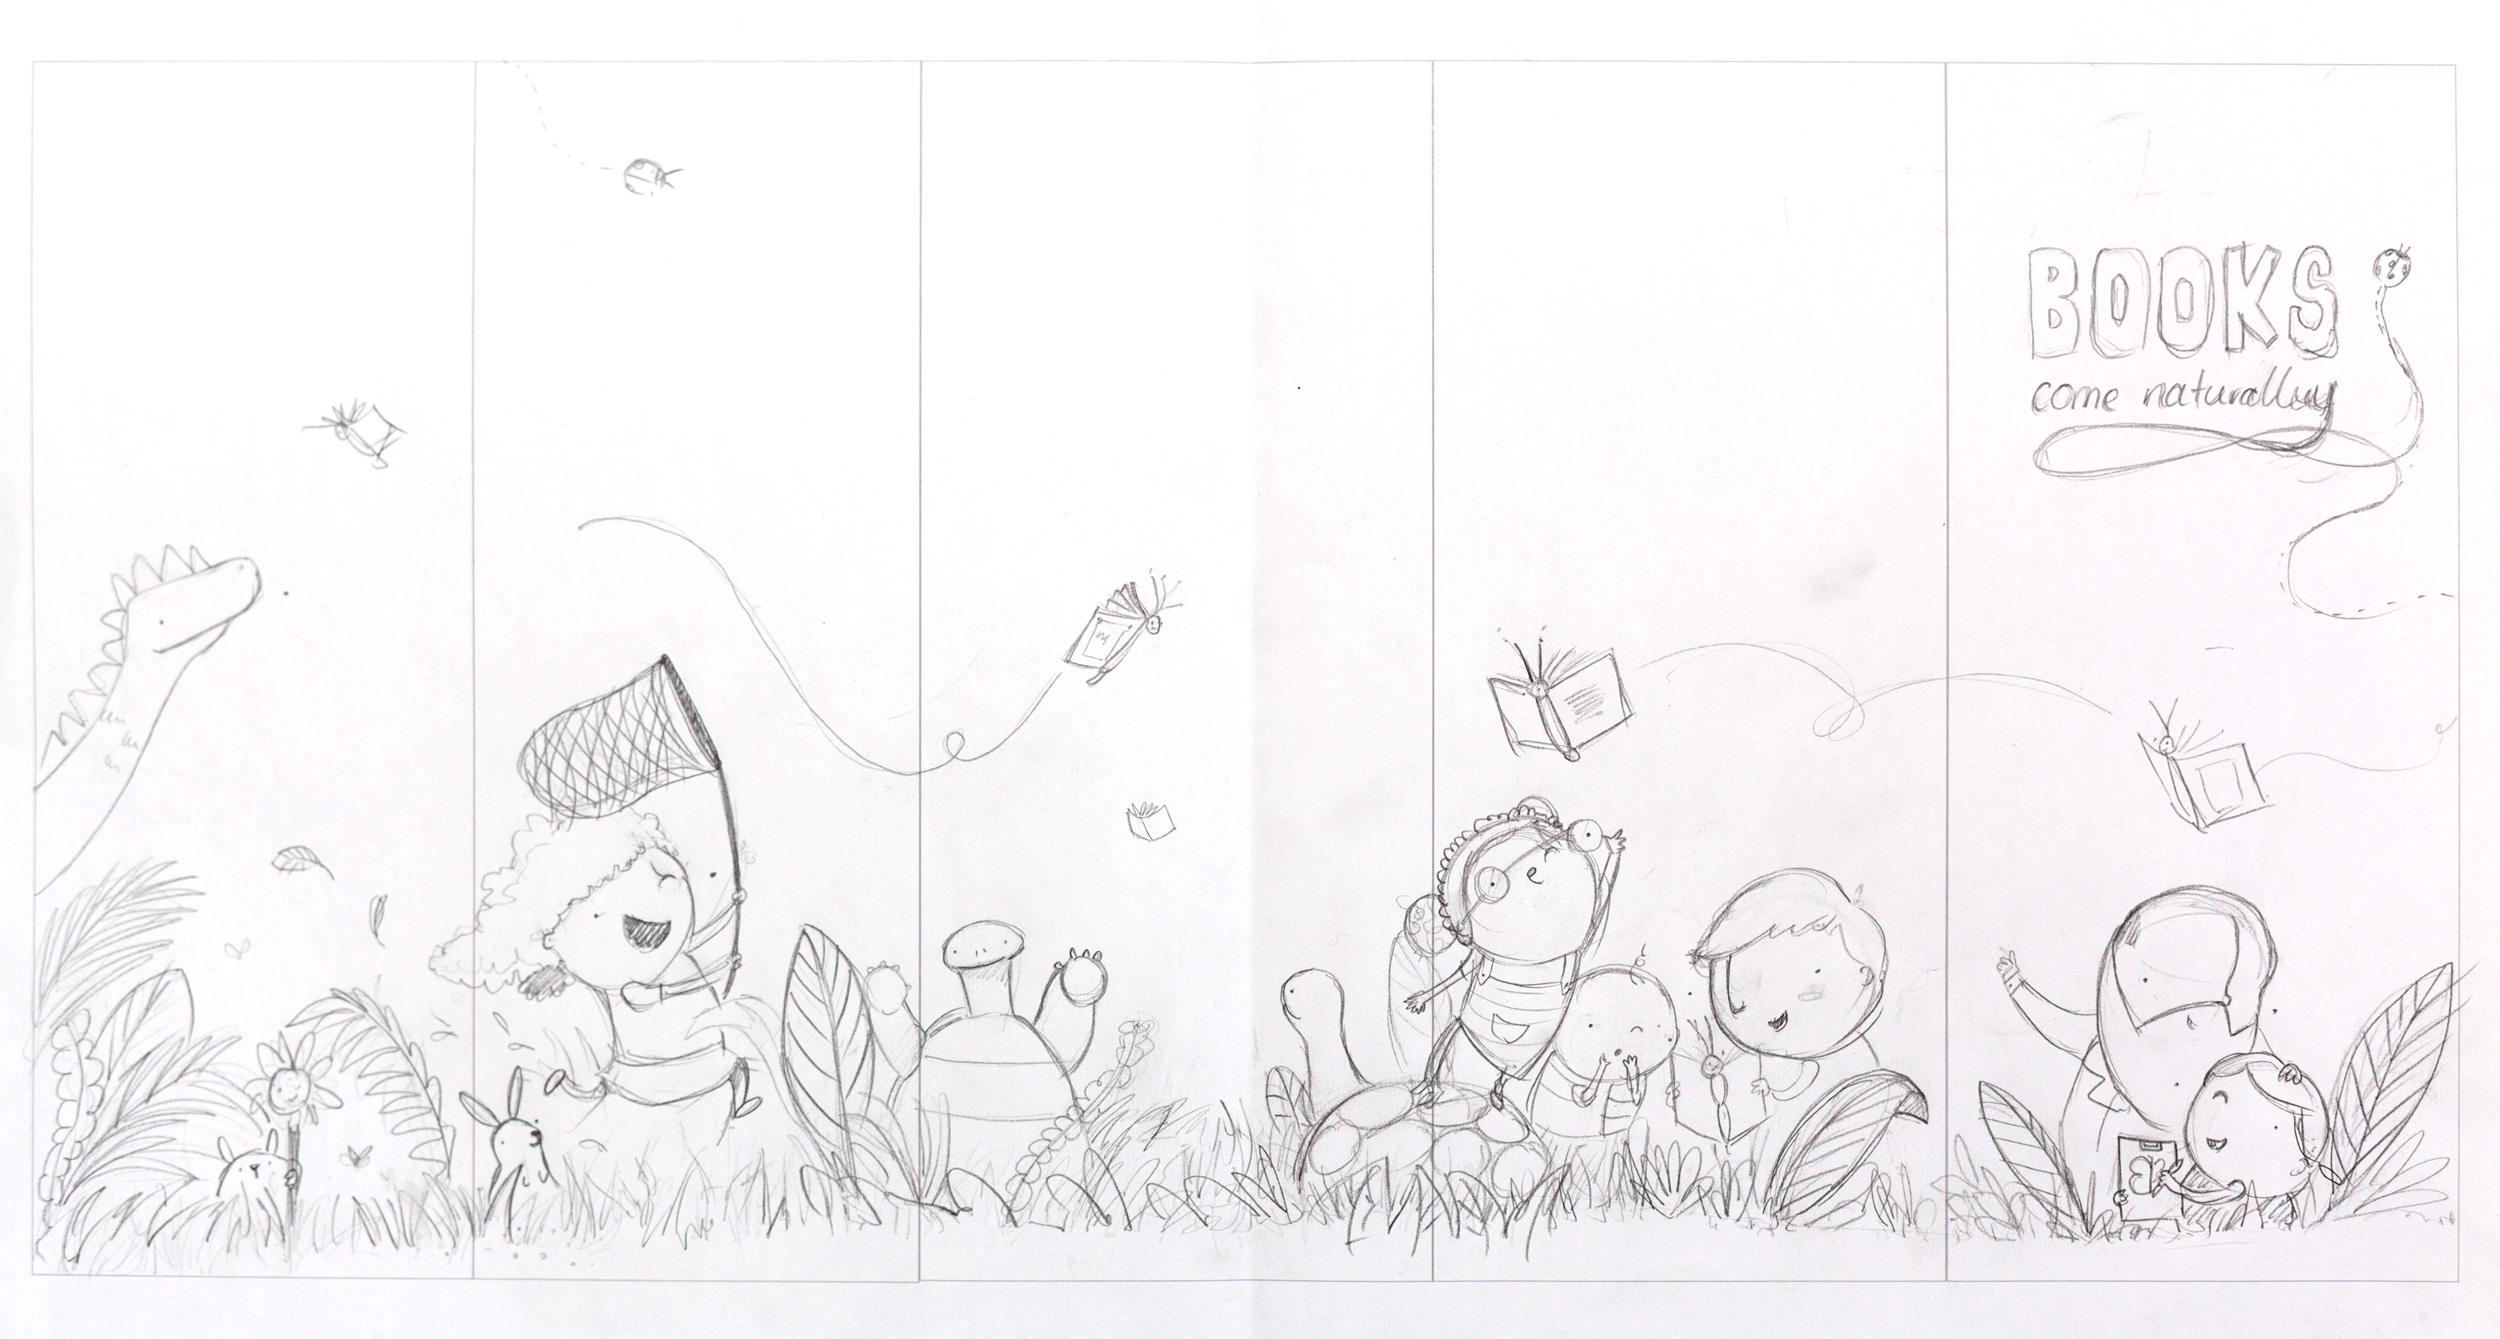 A pencil sketch of children and animals playing in a jungle